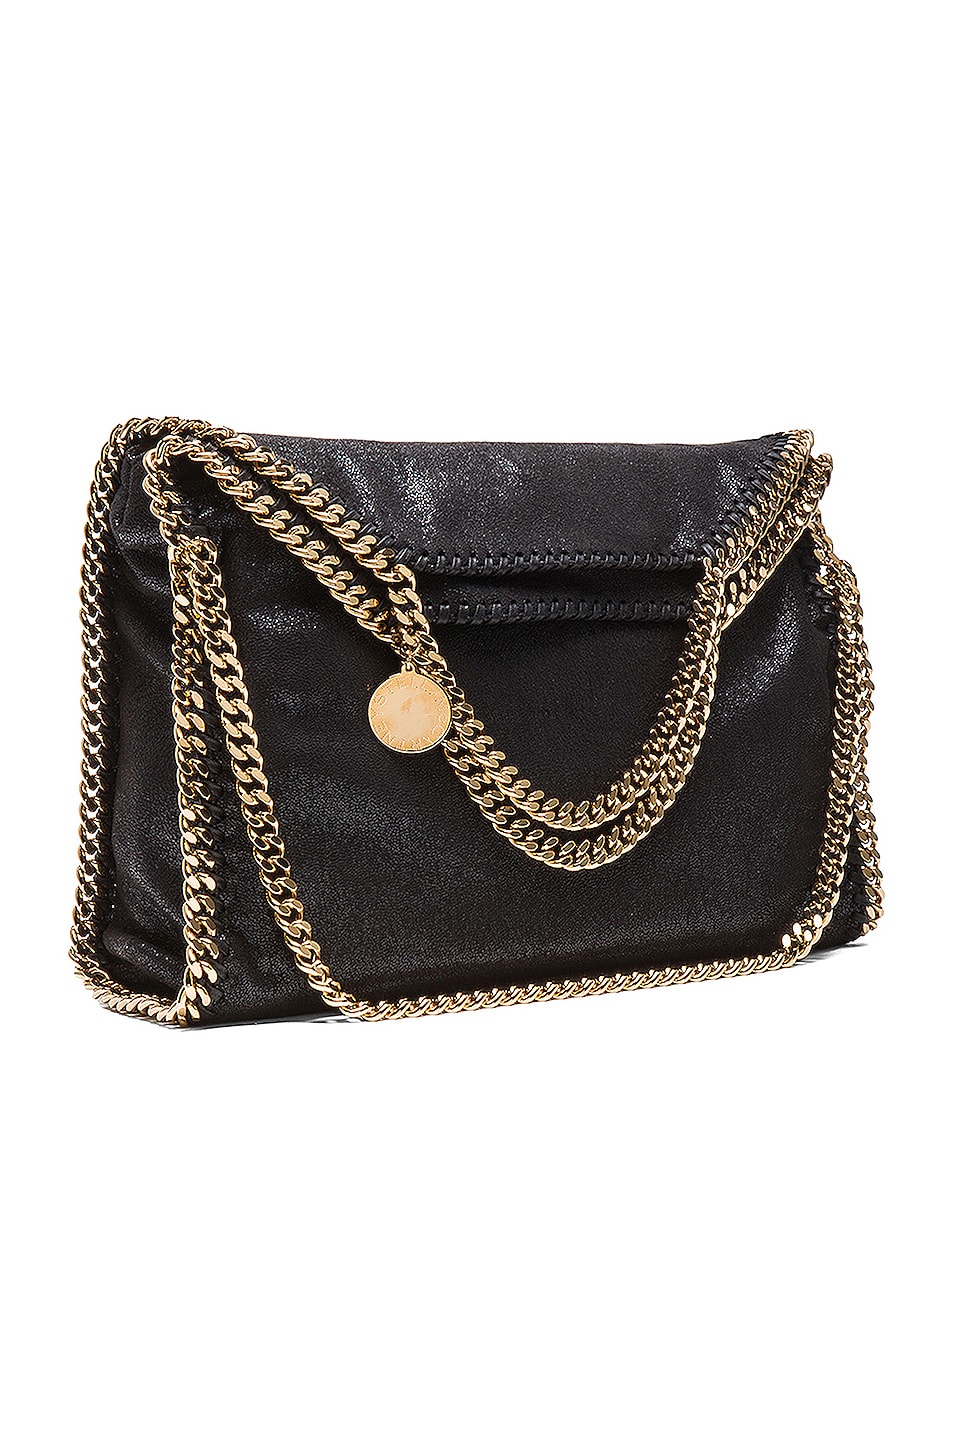 Image 1 of Stella McCartney Small Shaggy Deer Falabella Tote in Black